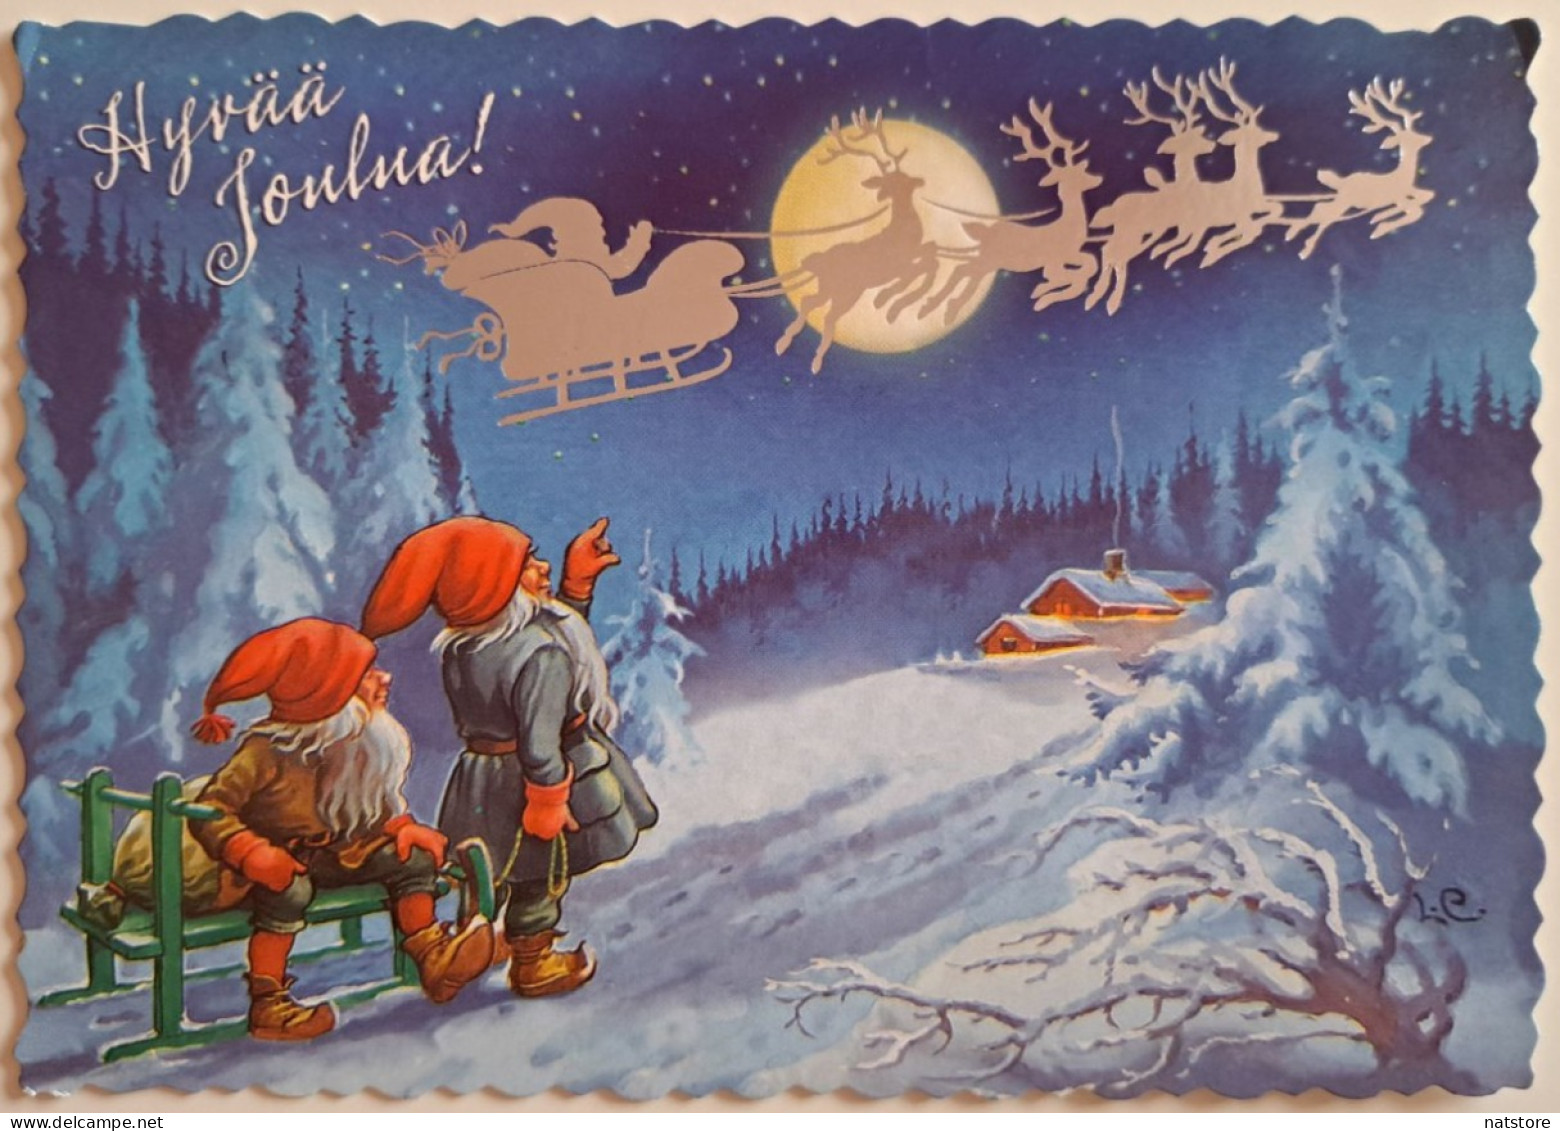 FINLAND.. POSTCARD WITH STAMP ..PAST MAIL..MERRY CHRISTMAS! - Lettres & Documents